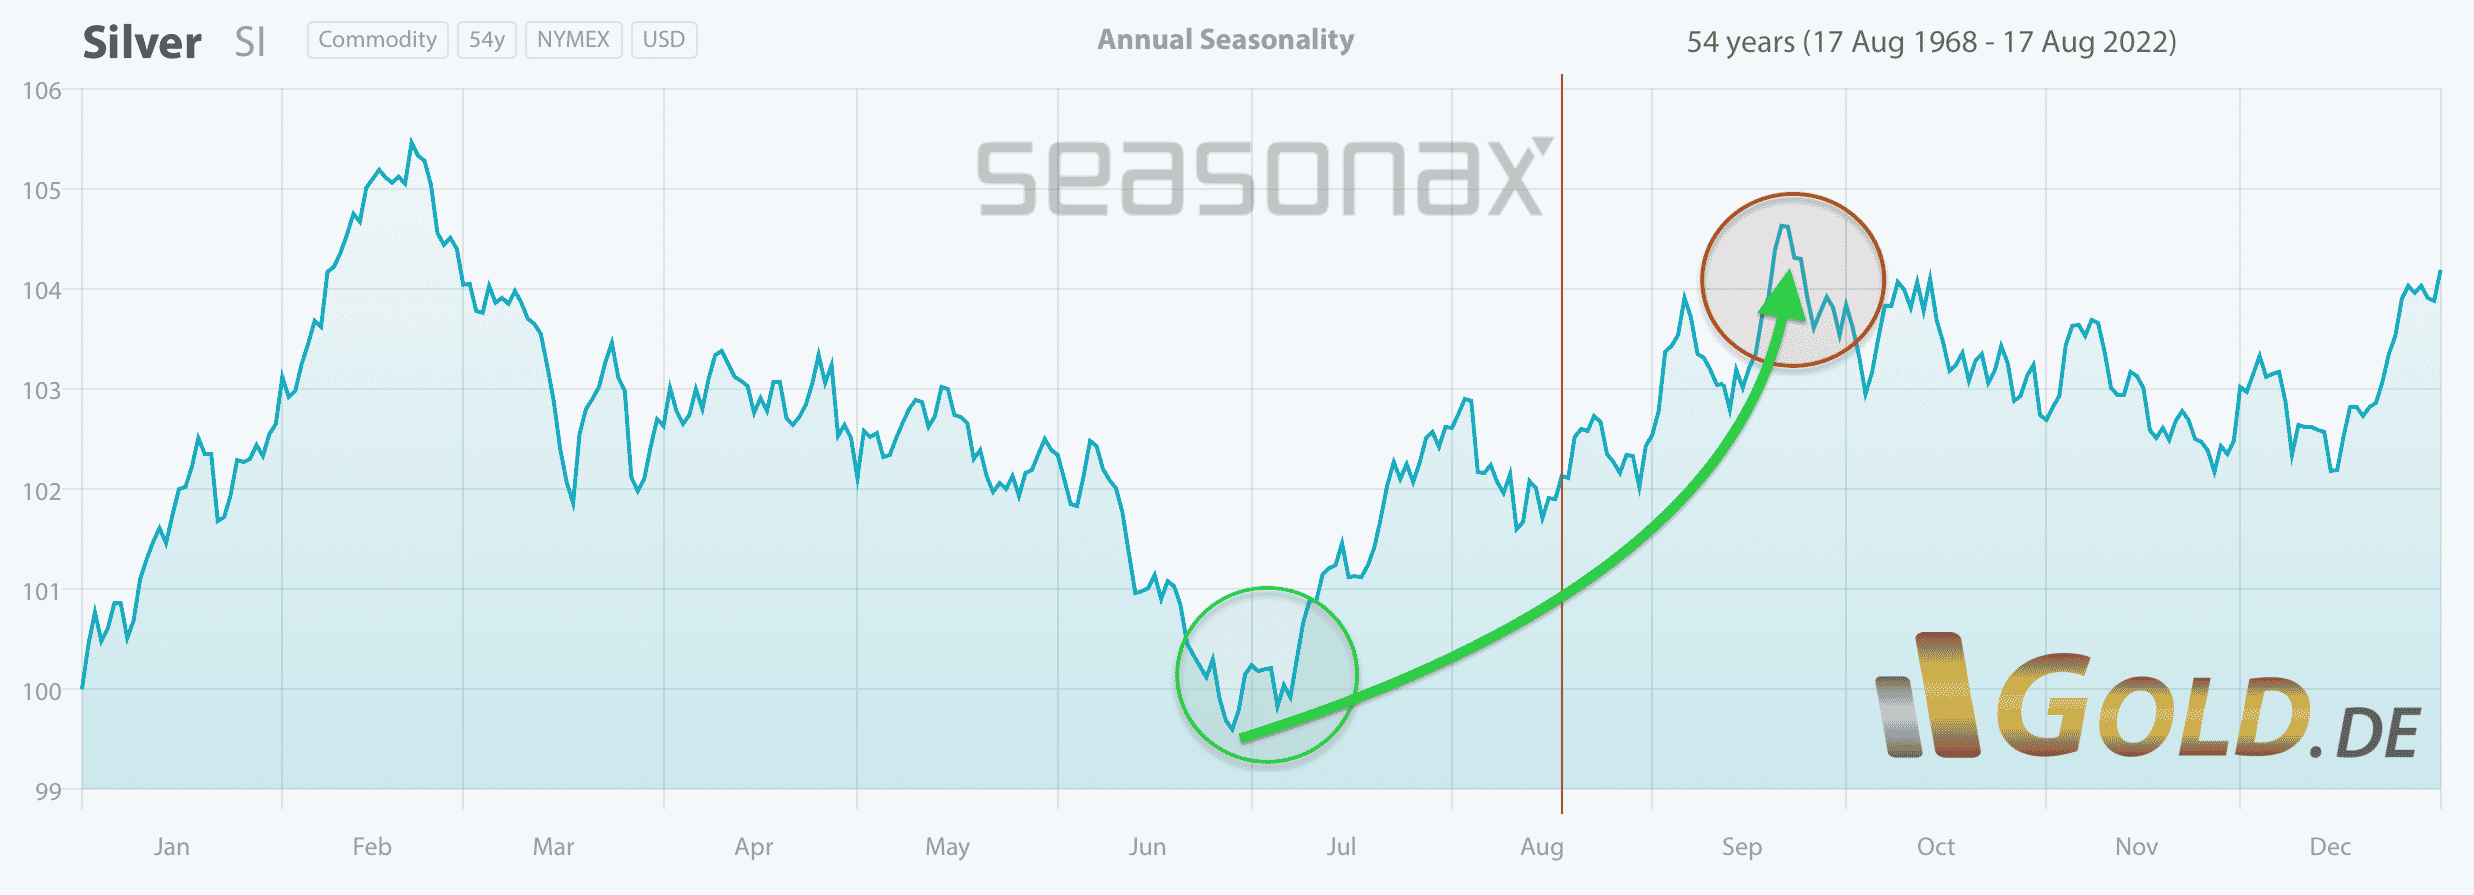 Silver seasonality as of August 18th, 2022 © Seasonax and Gold.de. September 19th, 2022, Silver - Questionable relative strength.